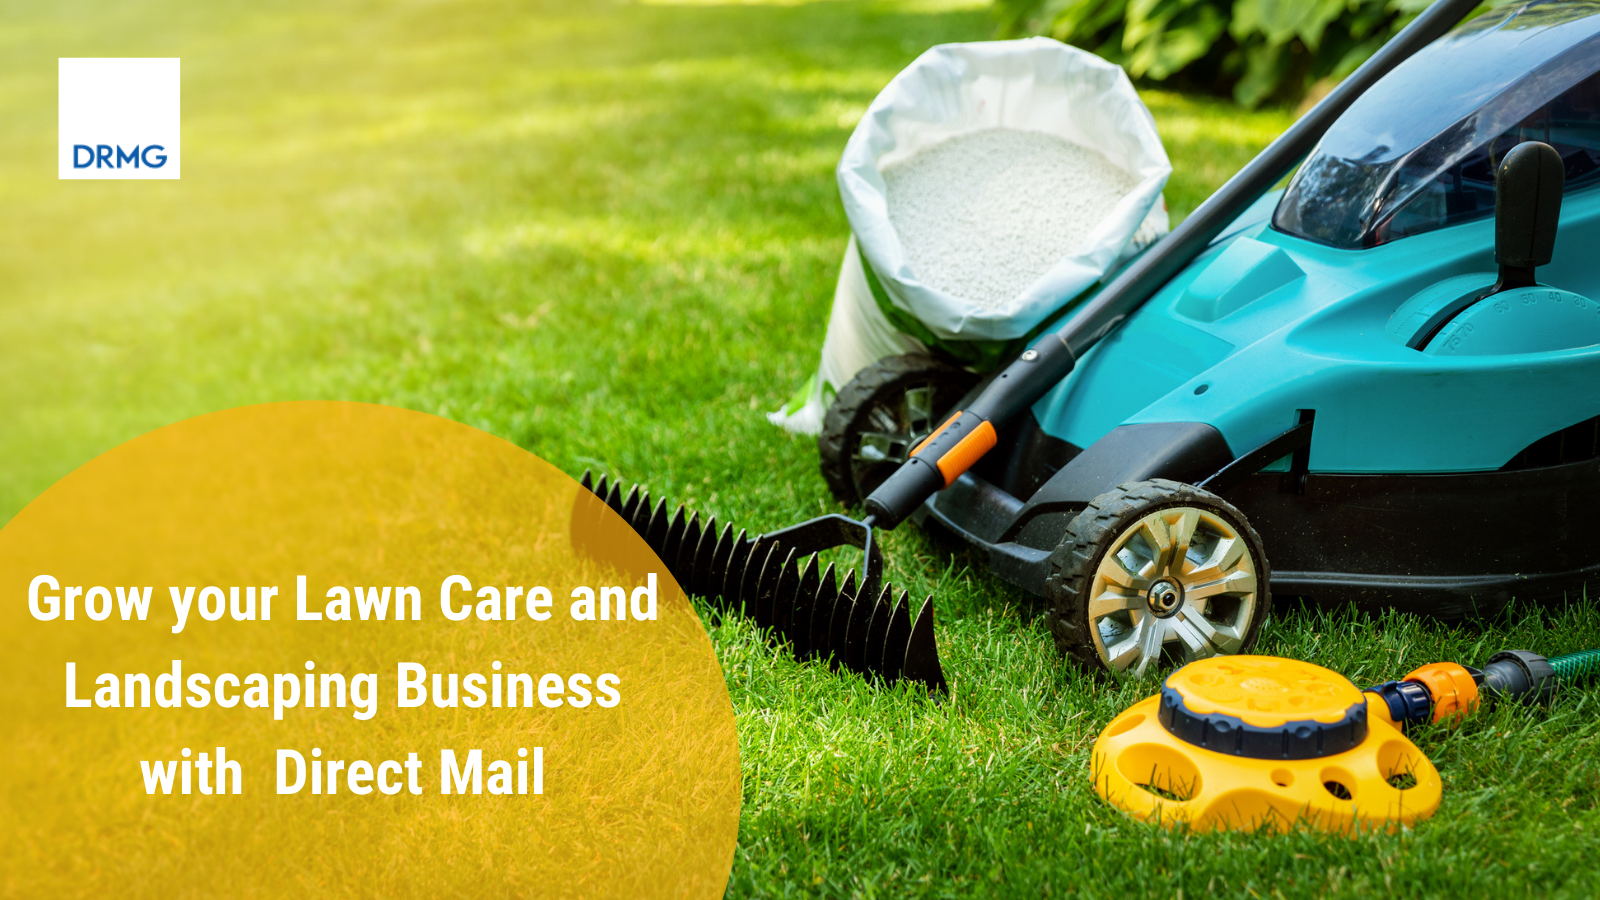 Grow your Lawn Care and Landscaping Business with Direct Mail